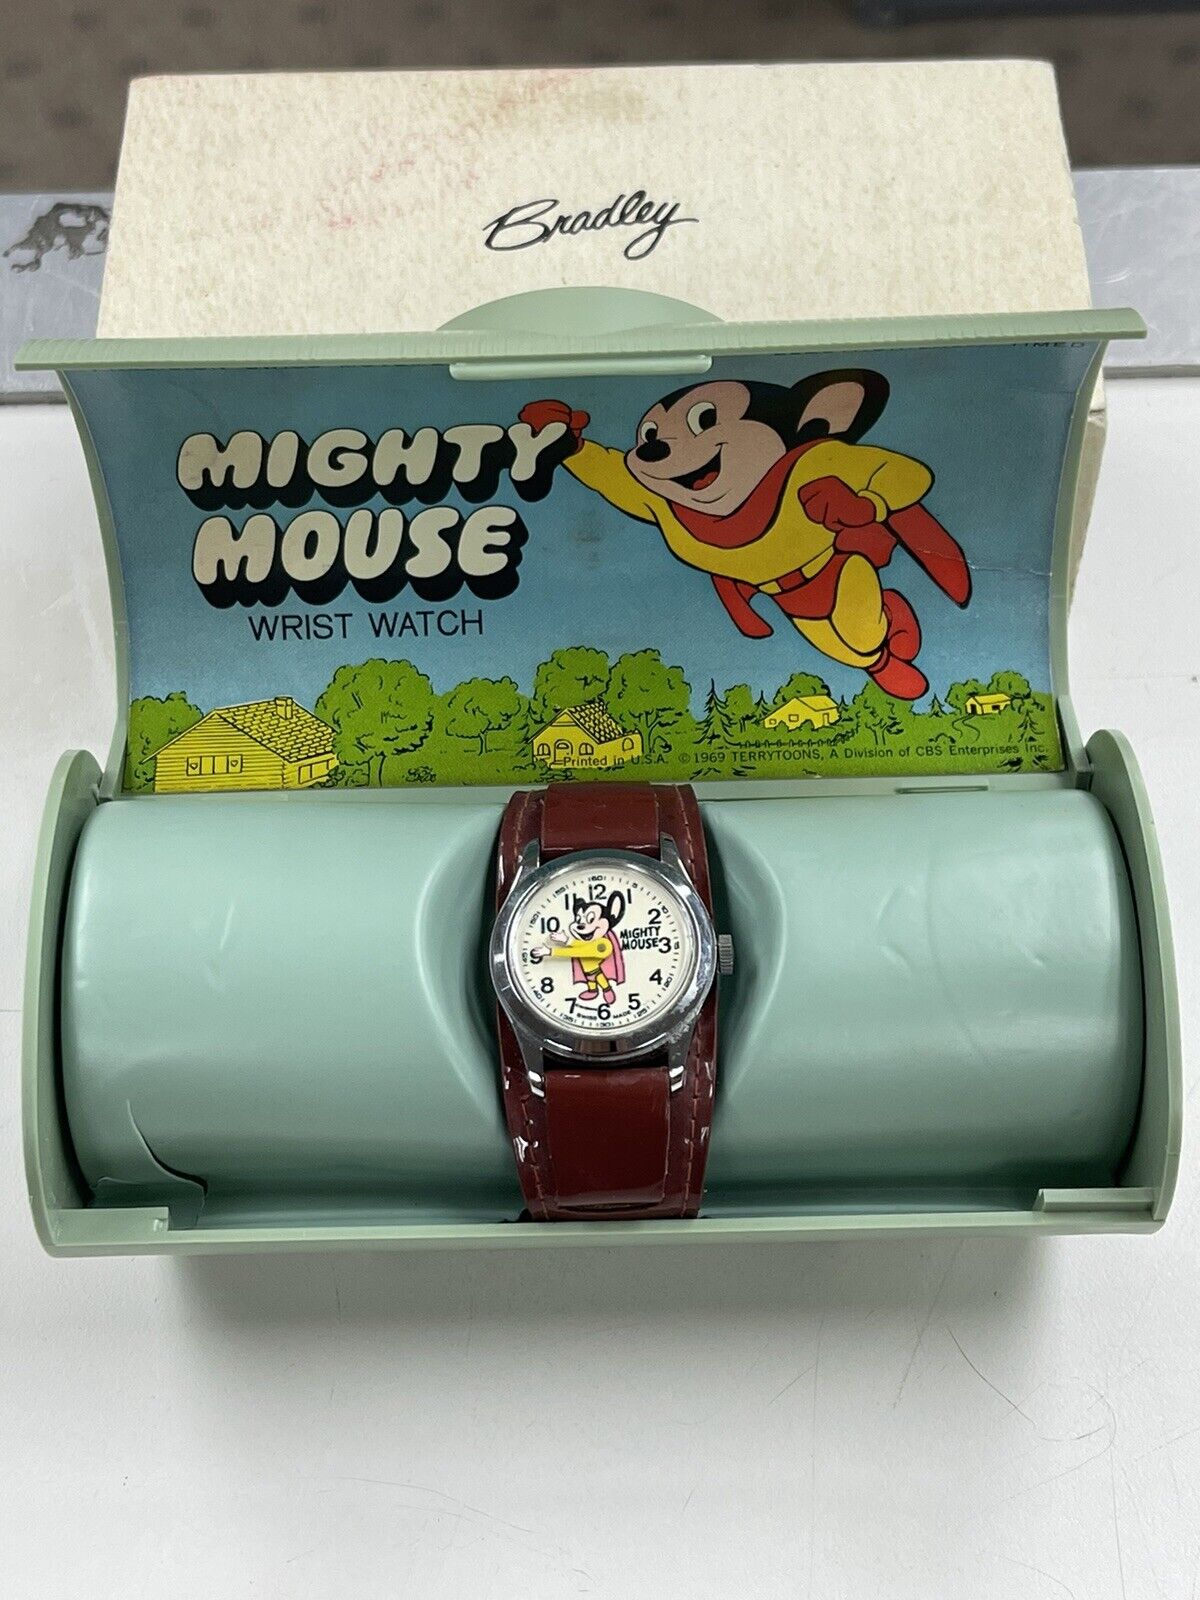 VINTAGE BRADLEY MIGHTY MOUSE WRIST WATCH